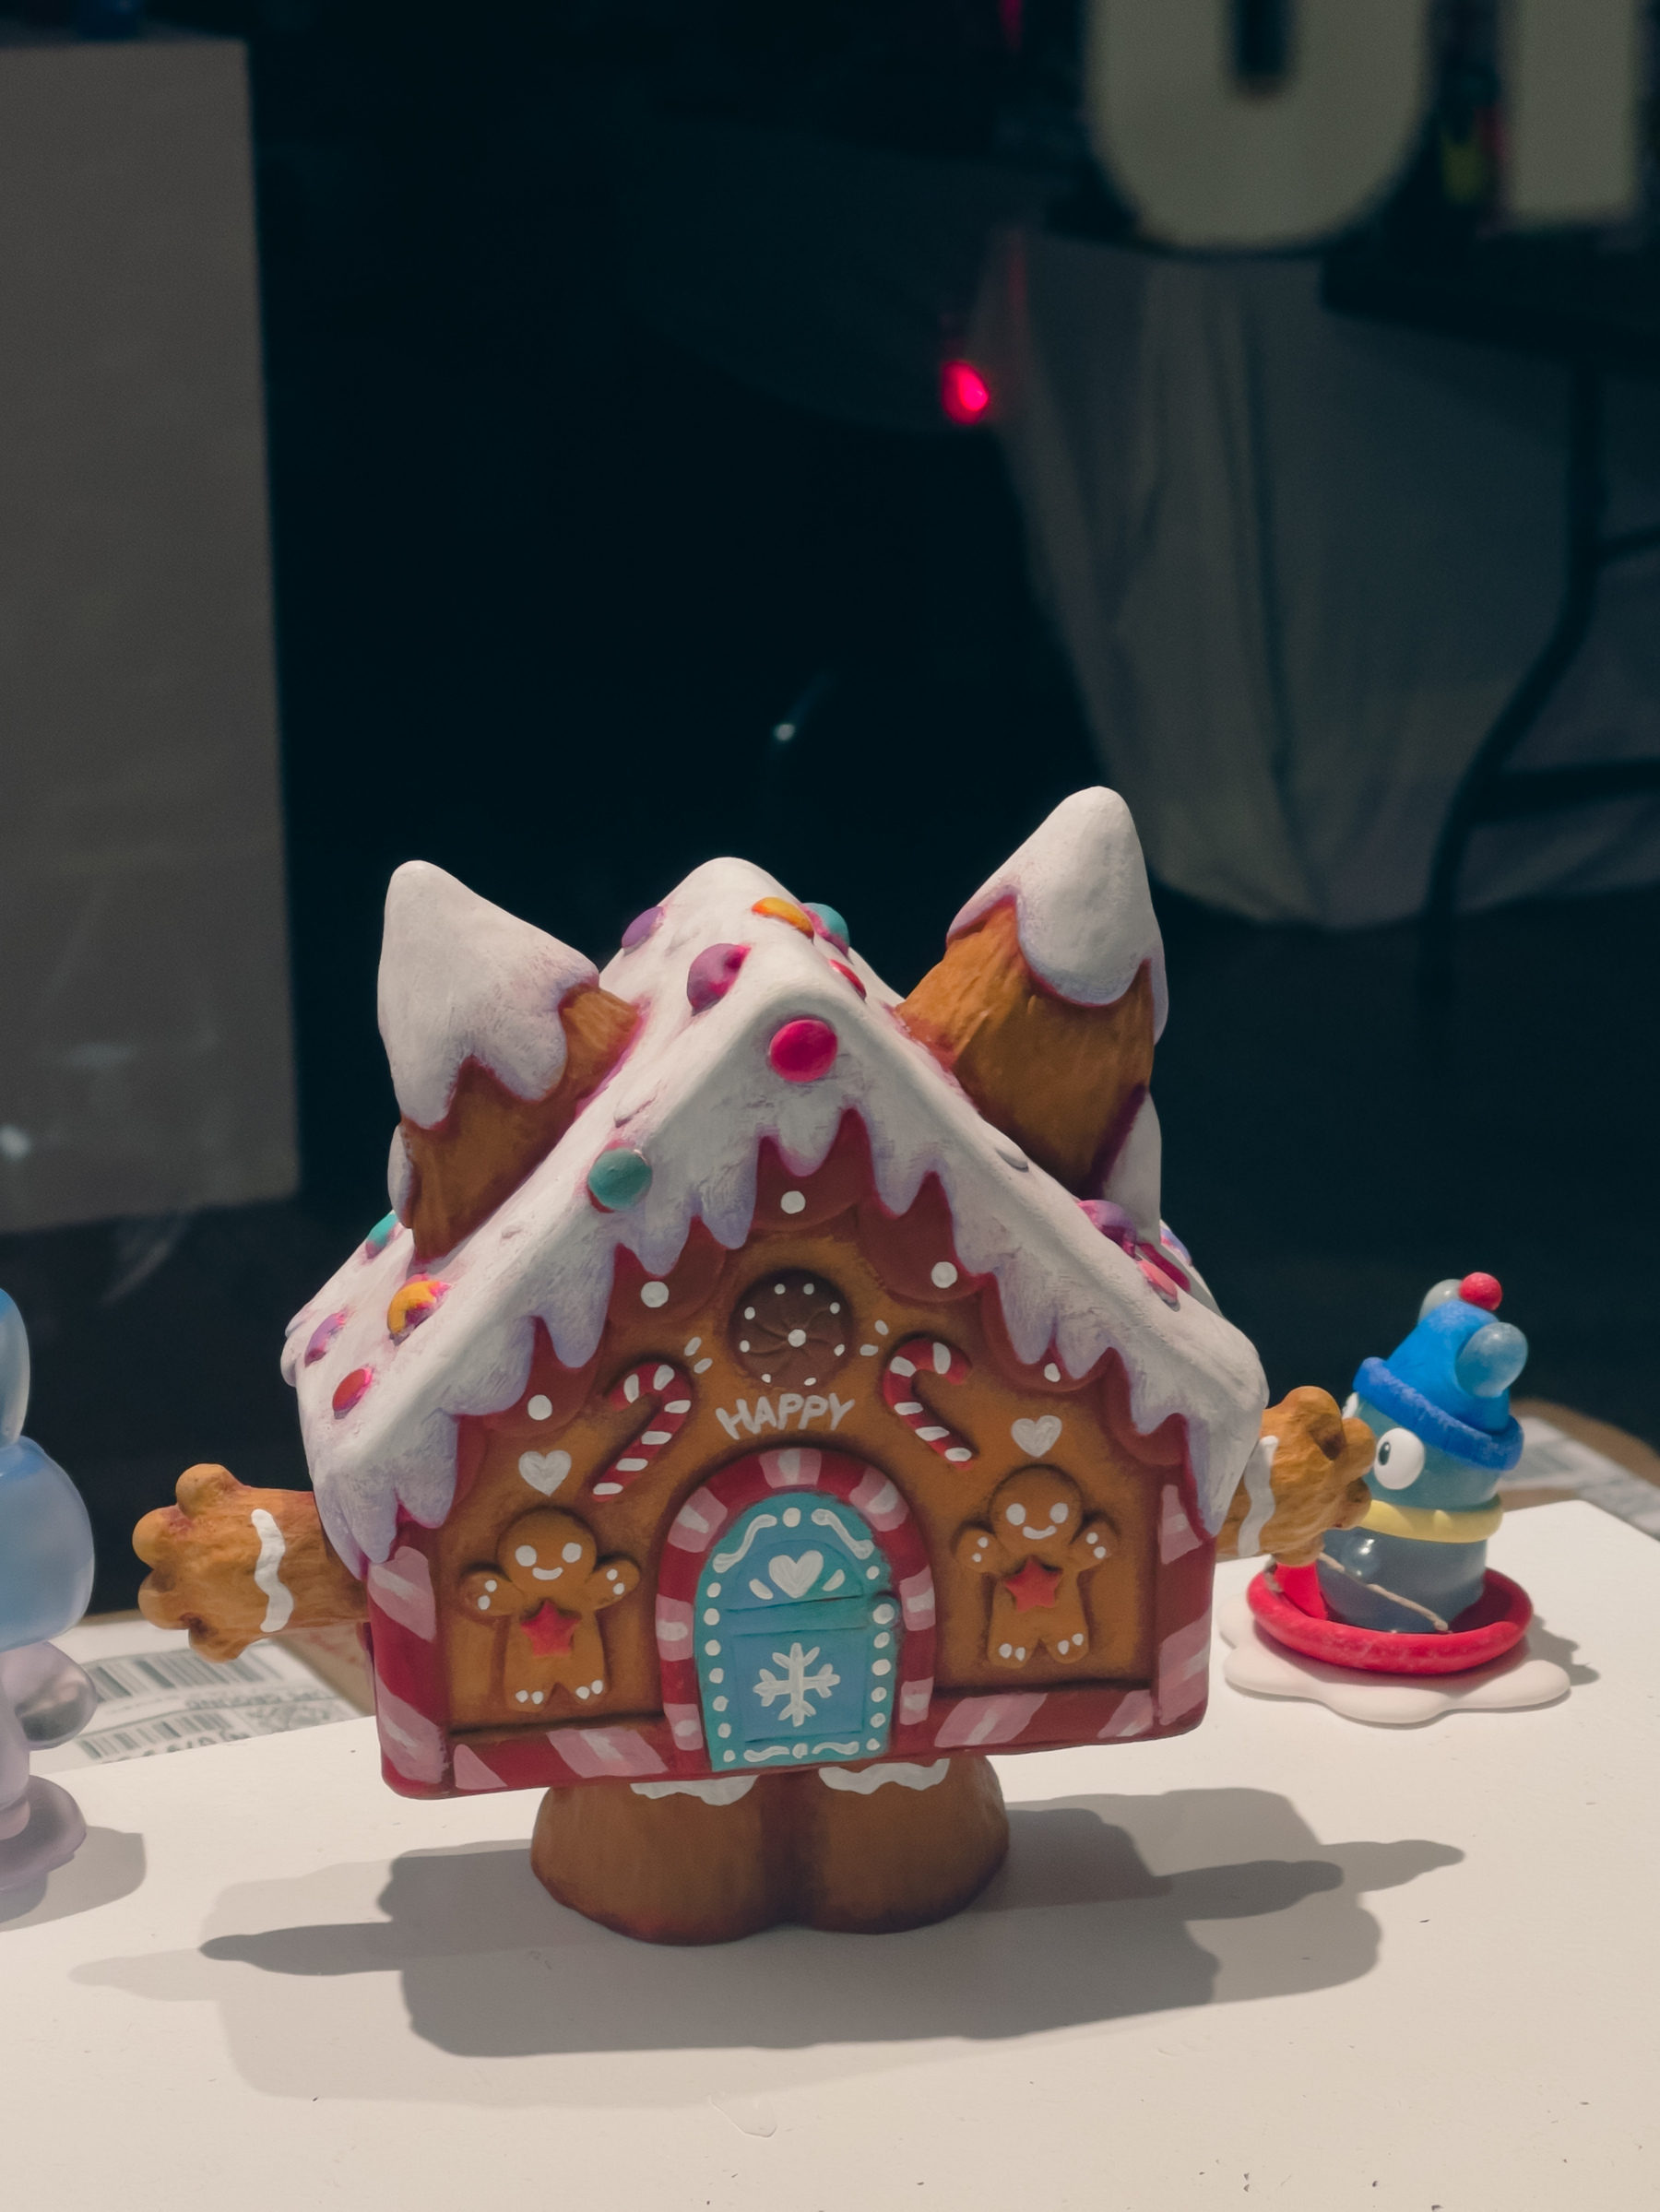 Gingerbread house toy in shop window.